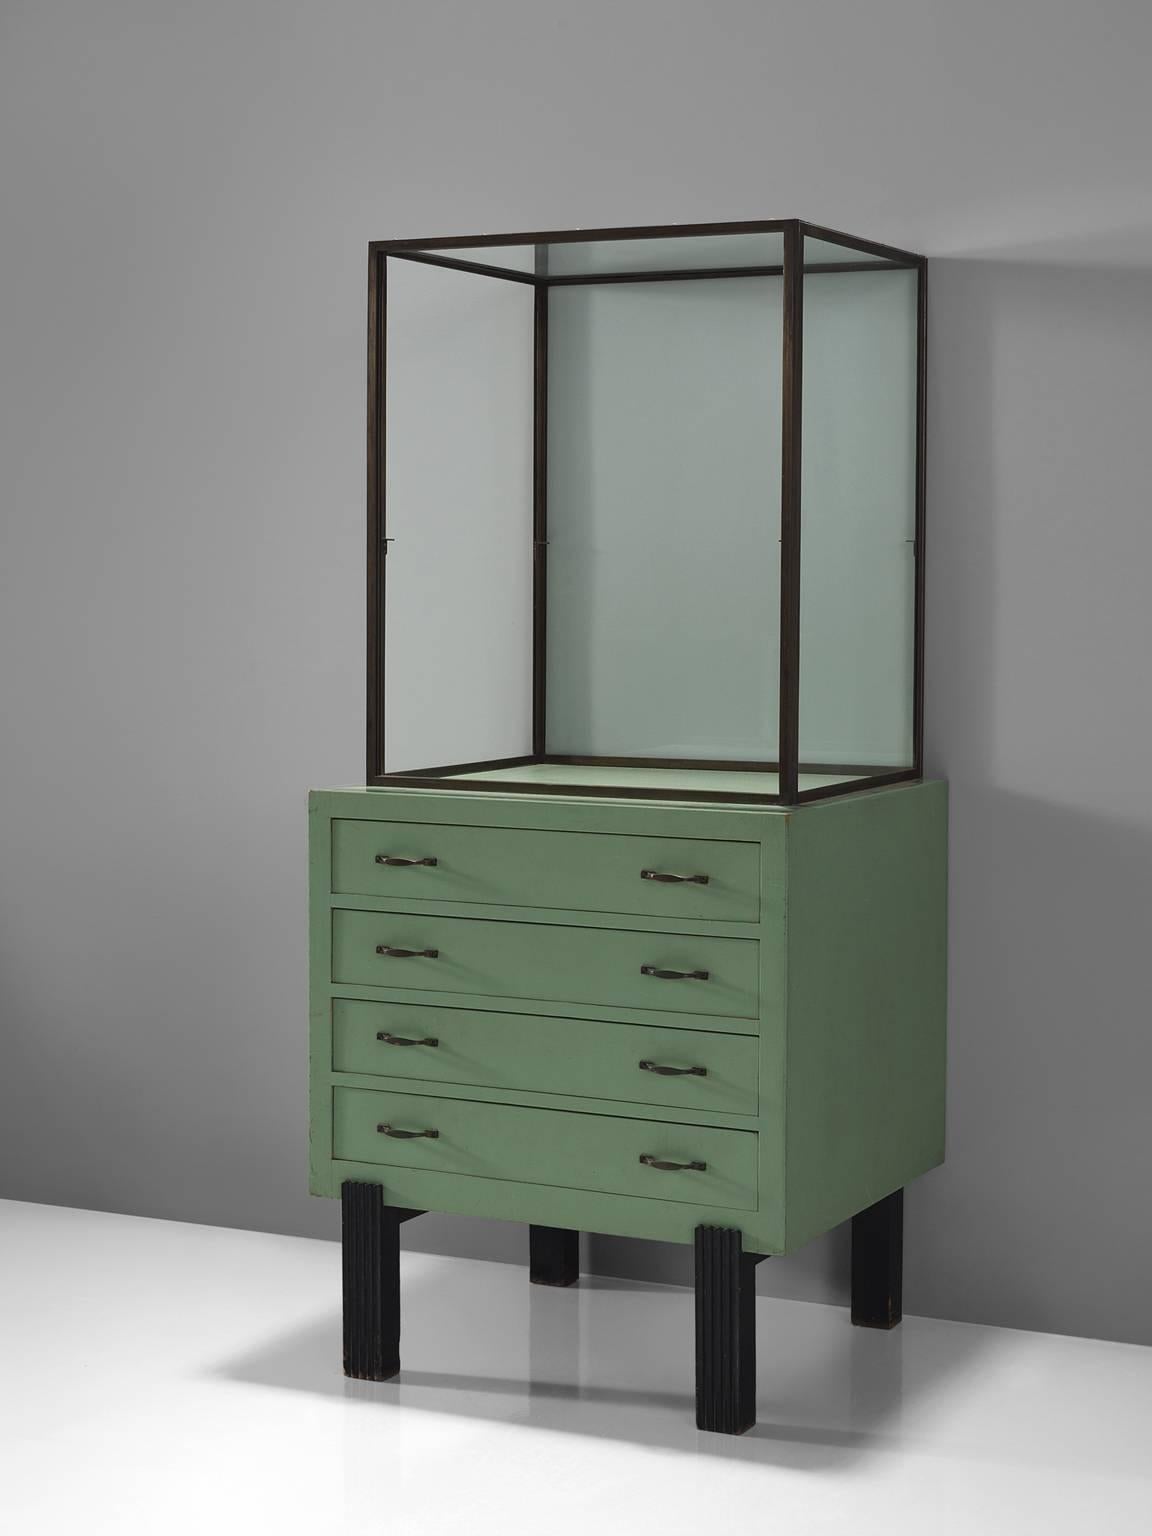 Showcase metal wood glass, Belgium, circa 1940.

Robust midcentury showcase in glass and wood with metal handles. The base of this vitrine is beautifully simply designed as it features four square black feet. The drawers of the bottom cabinet have